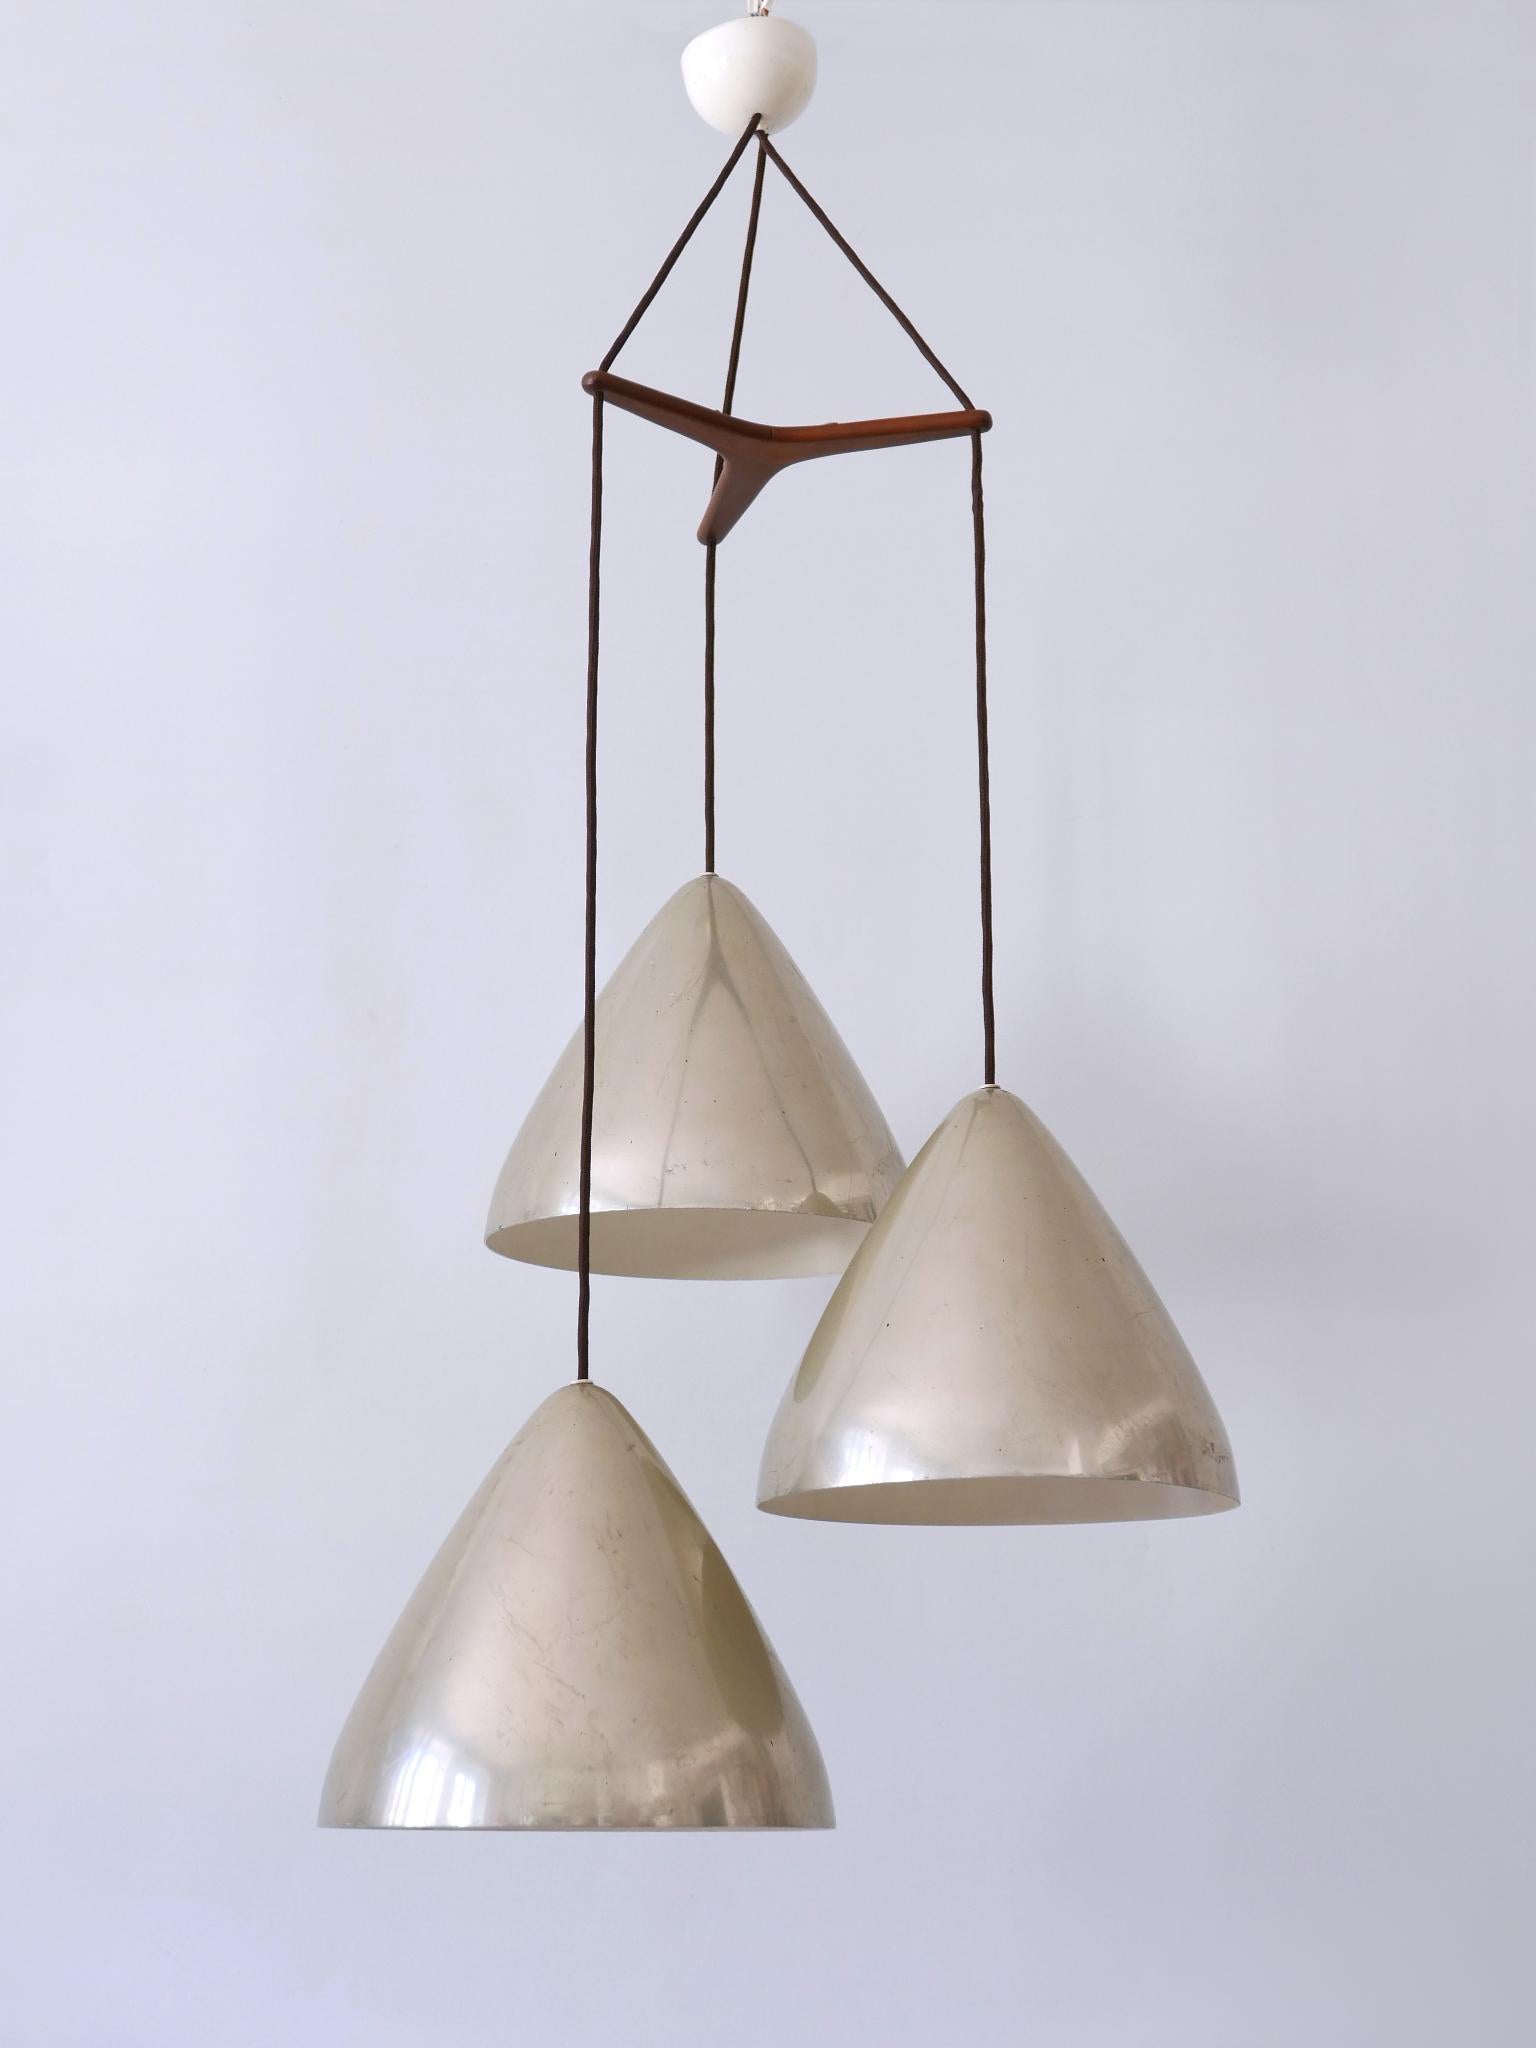 Mid-Century Modern Elegant Cascading Pendant Lamp by Lisa Johansson-Pape for Orno Finland 1960s For Sale